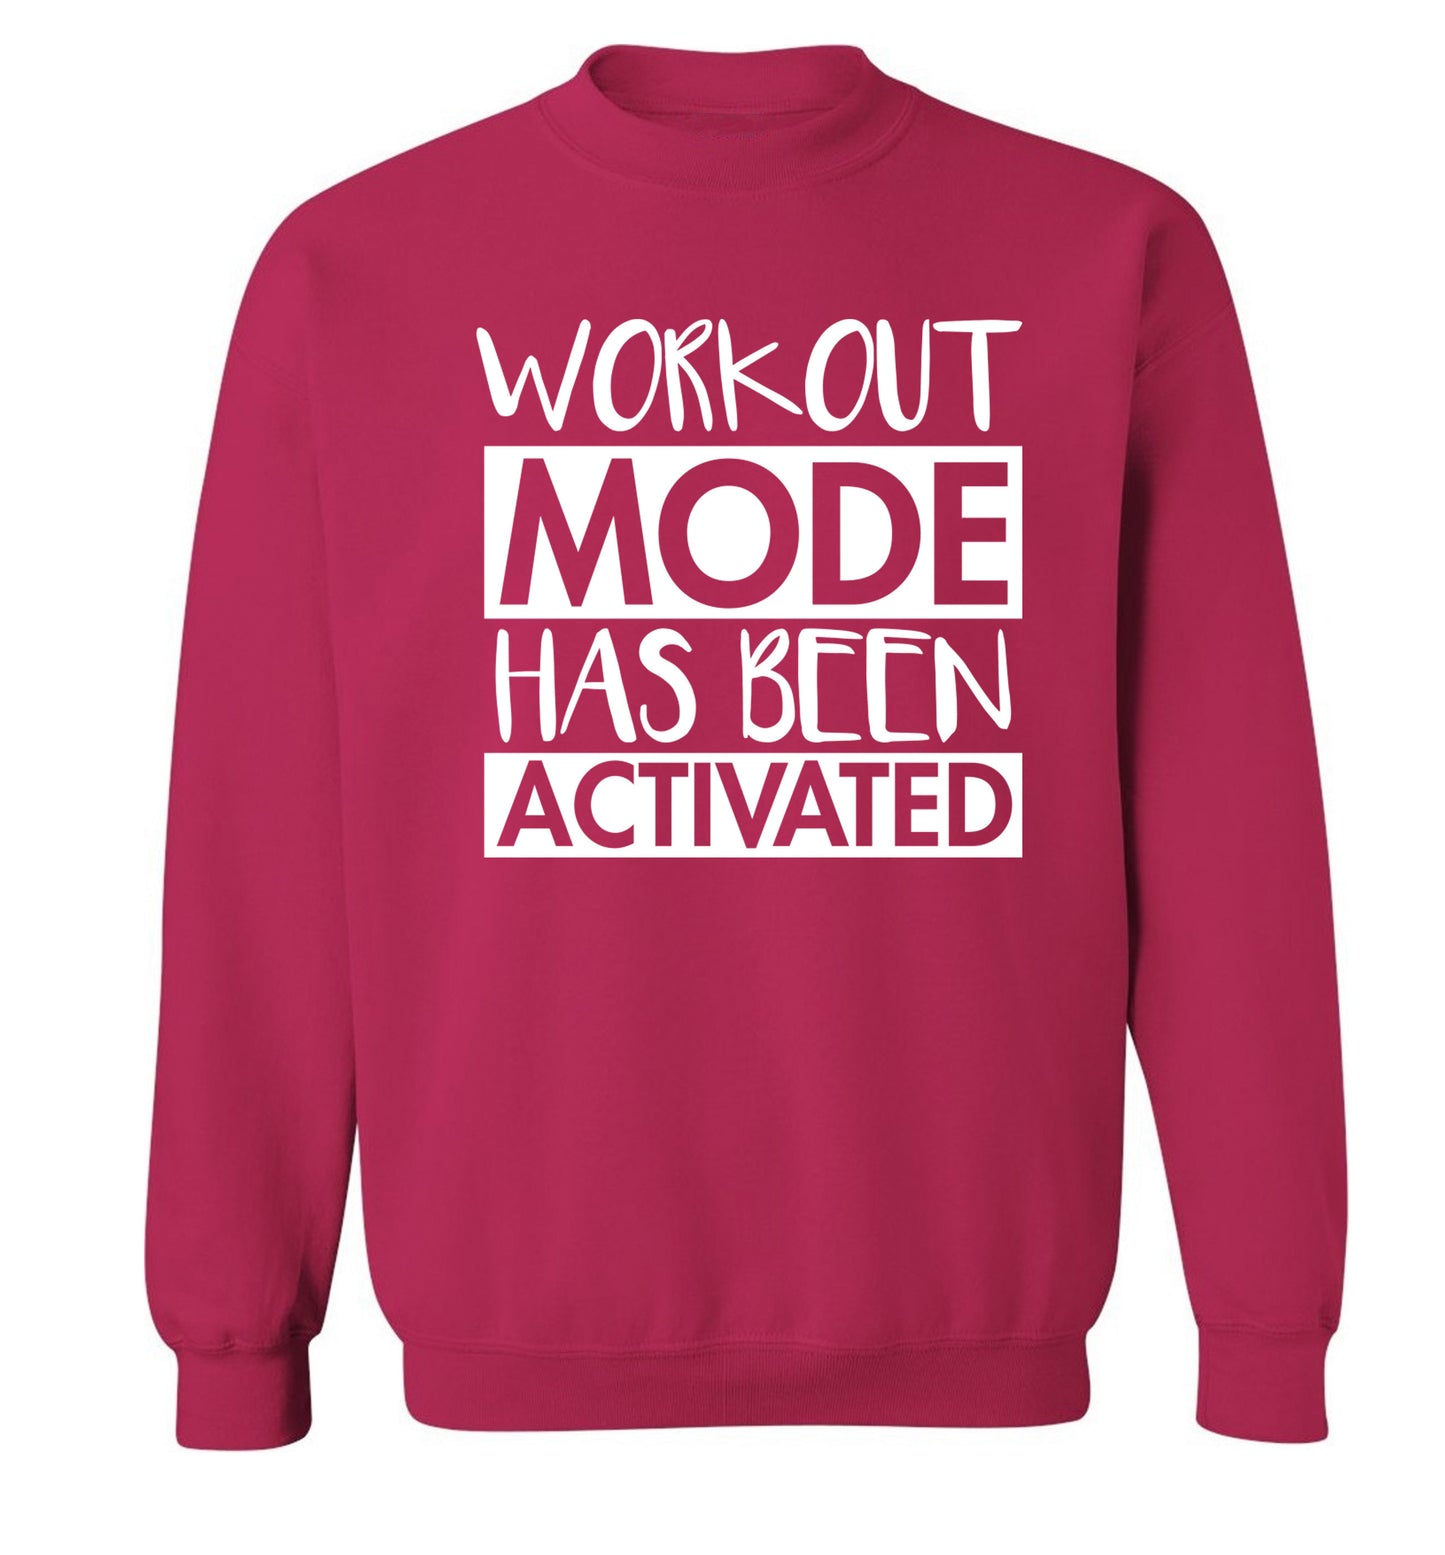 Workout mode has been activated Adult's unisex pink Sweater 2XL